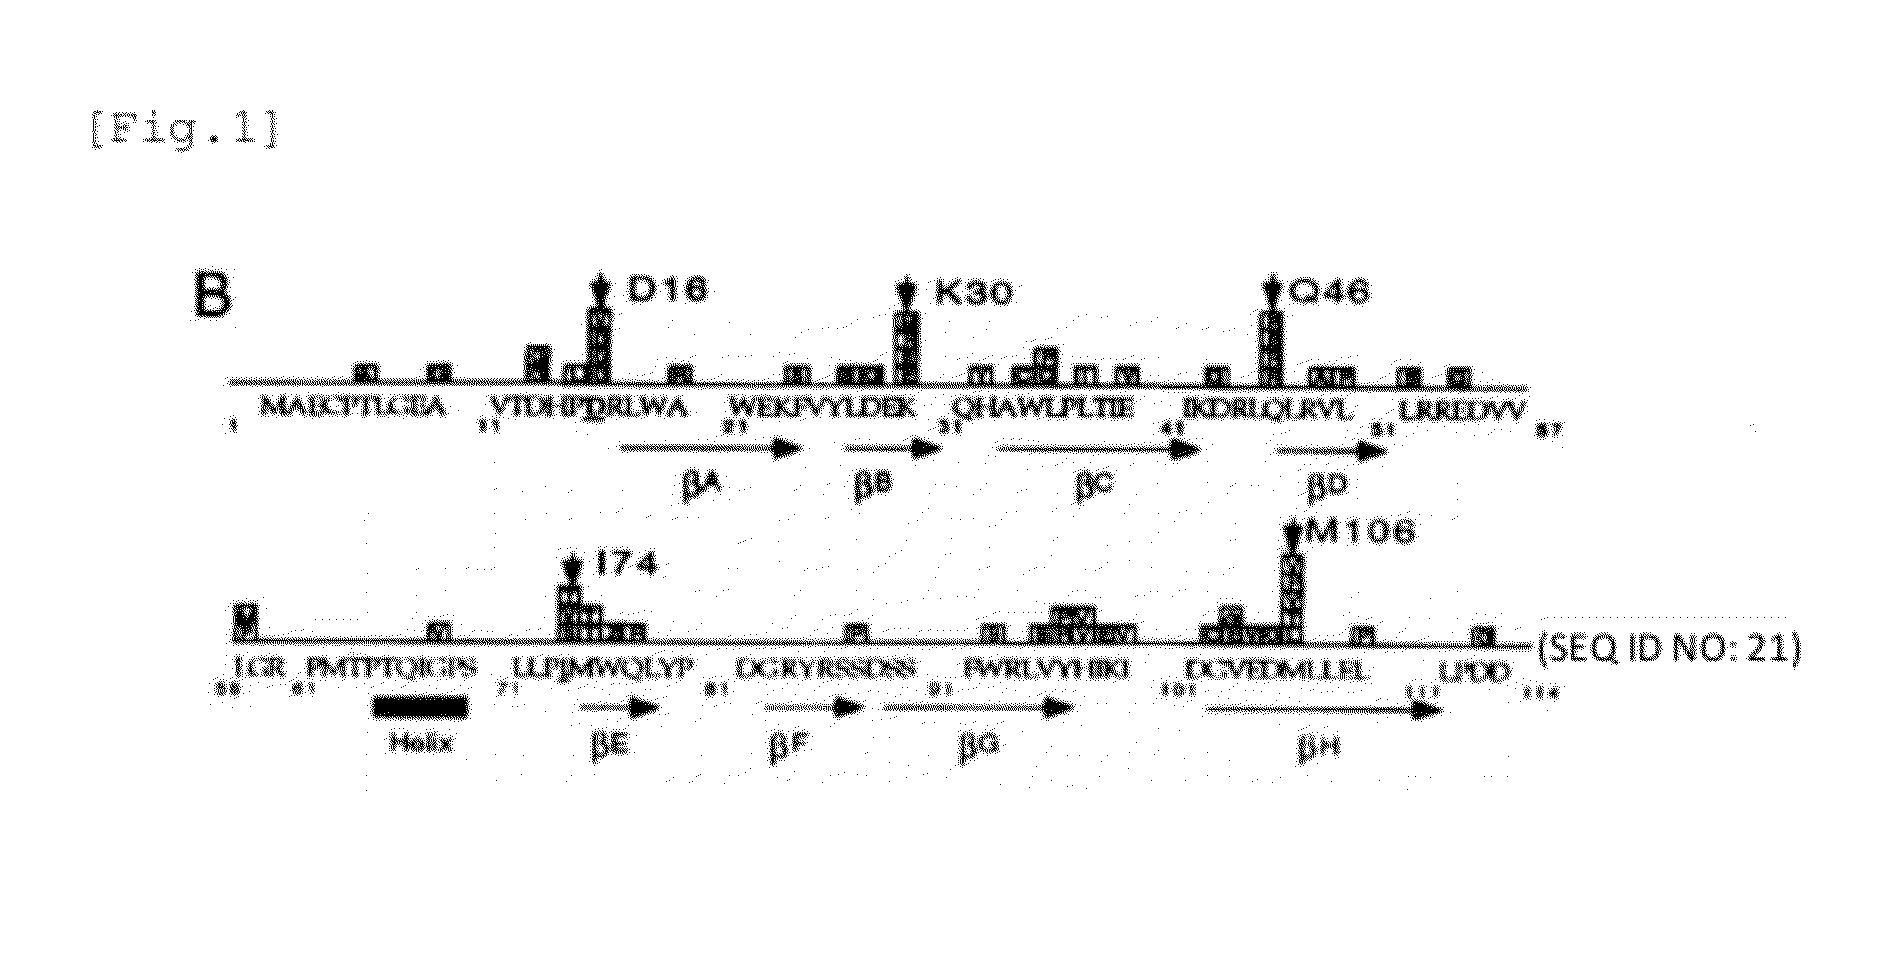 Akt activity specifically inhibiting polypeptide